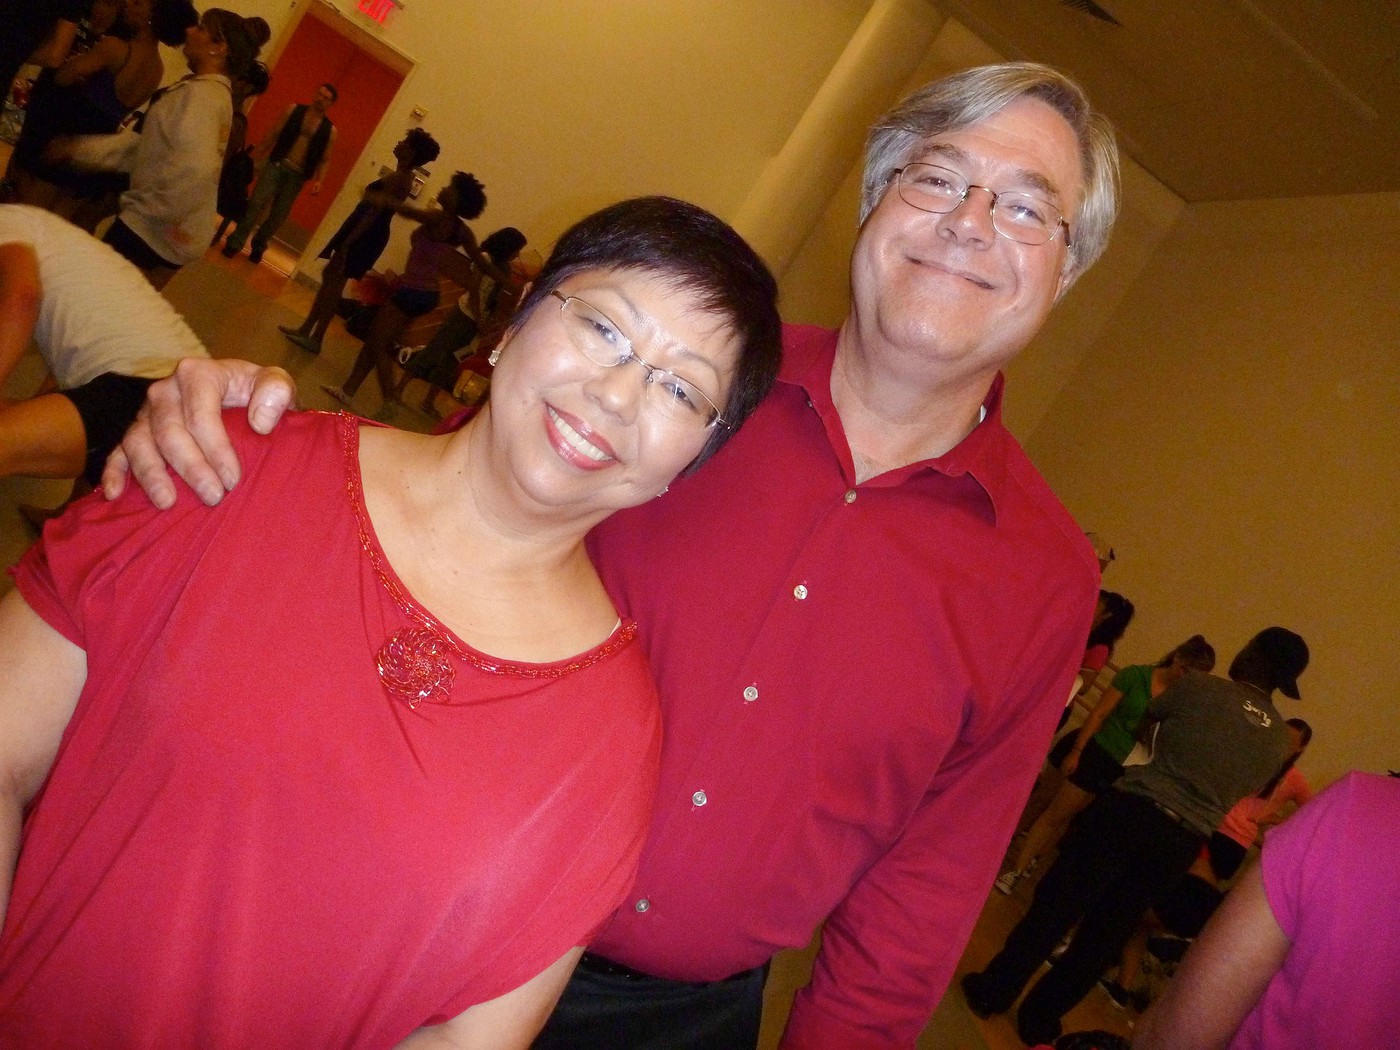 Doug & Mary Holaday - Connecitcut West Coast Swing Performance Group at Alvin Ailey Ciitgroup Theater